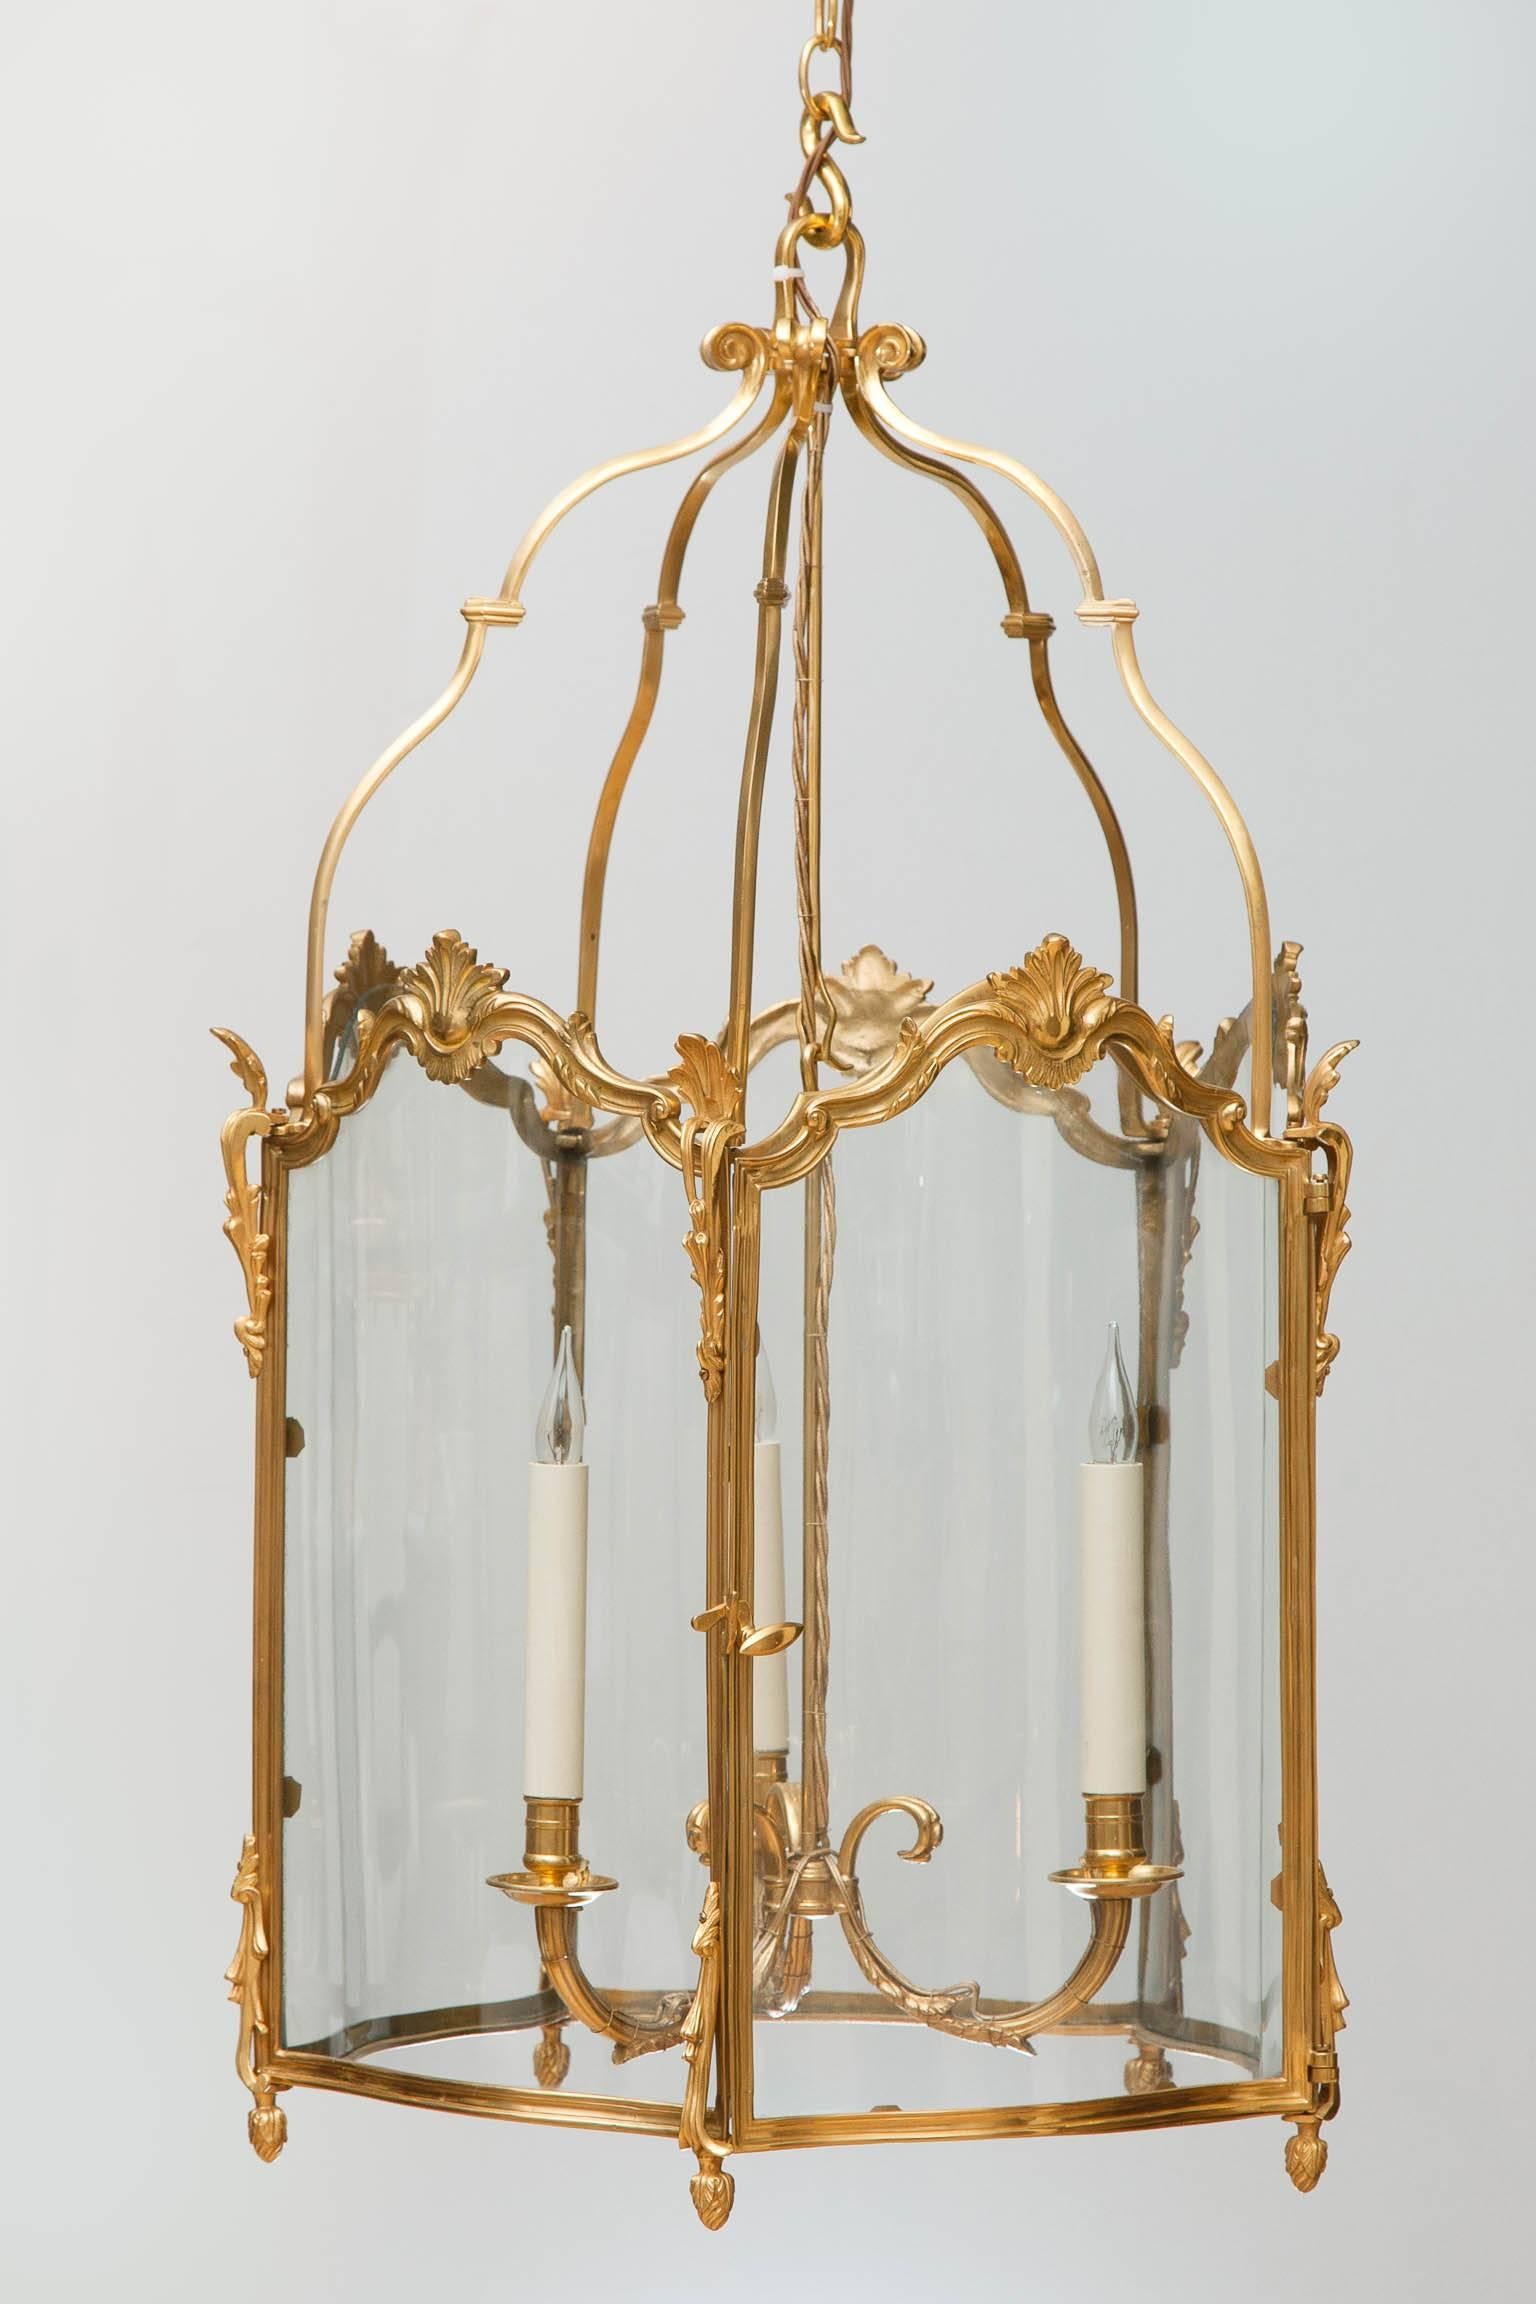 Pentagonal lanterns with five curved glass panels including the door with cast incised metalwork, suspended from five shaped brackets with small cast finial feet in the shade of buds with leaves. Original three arm pendants with acanthus decoration.